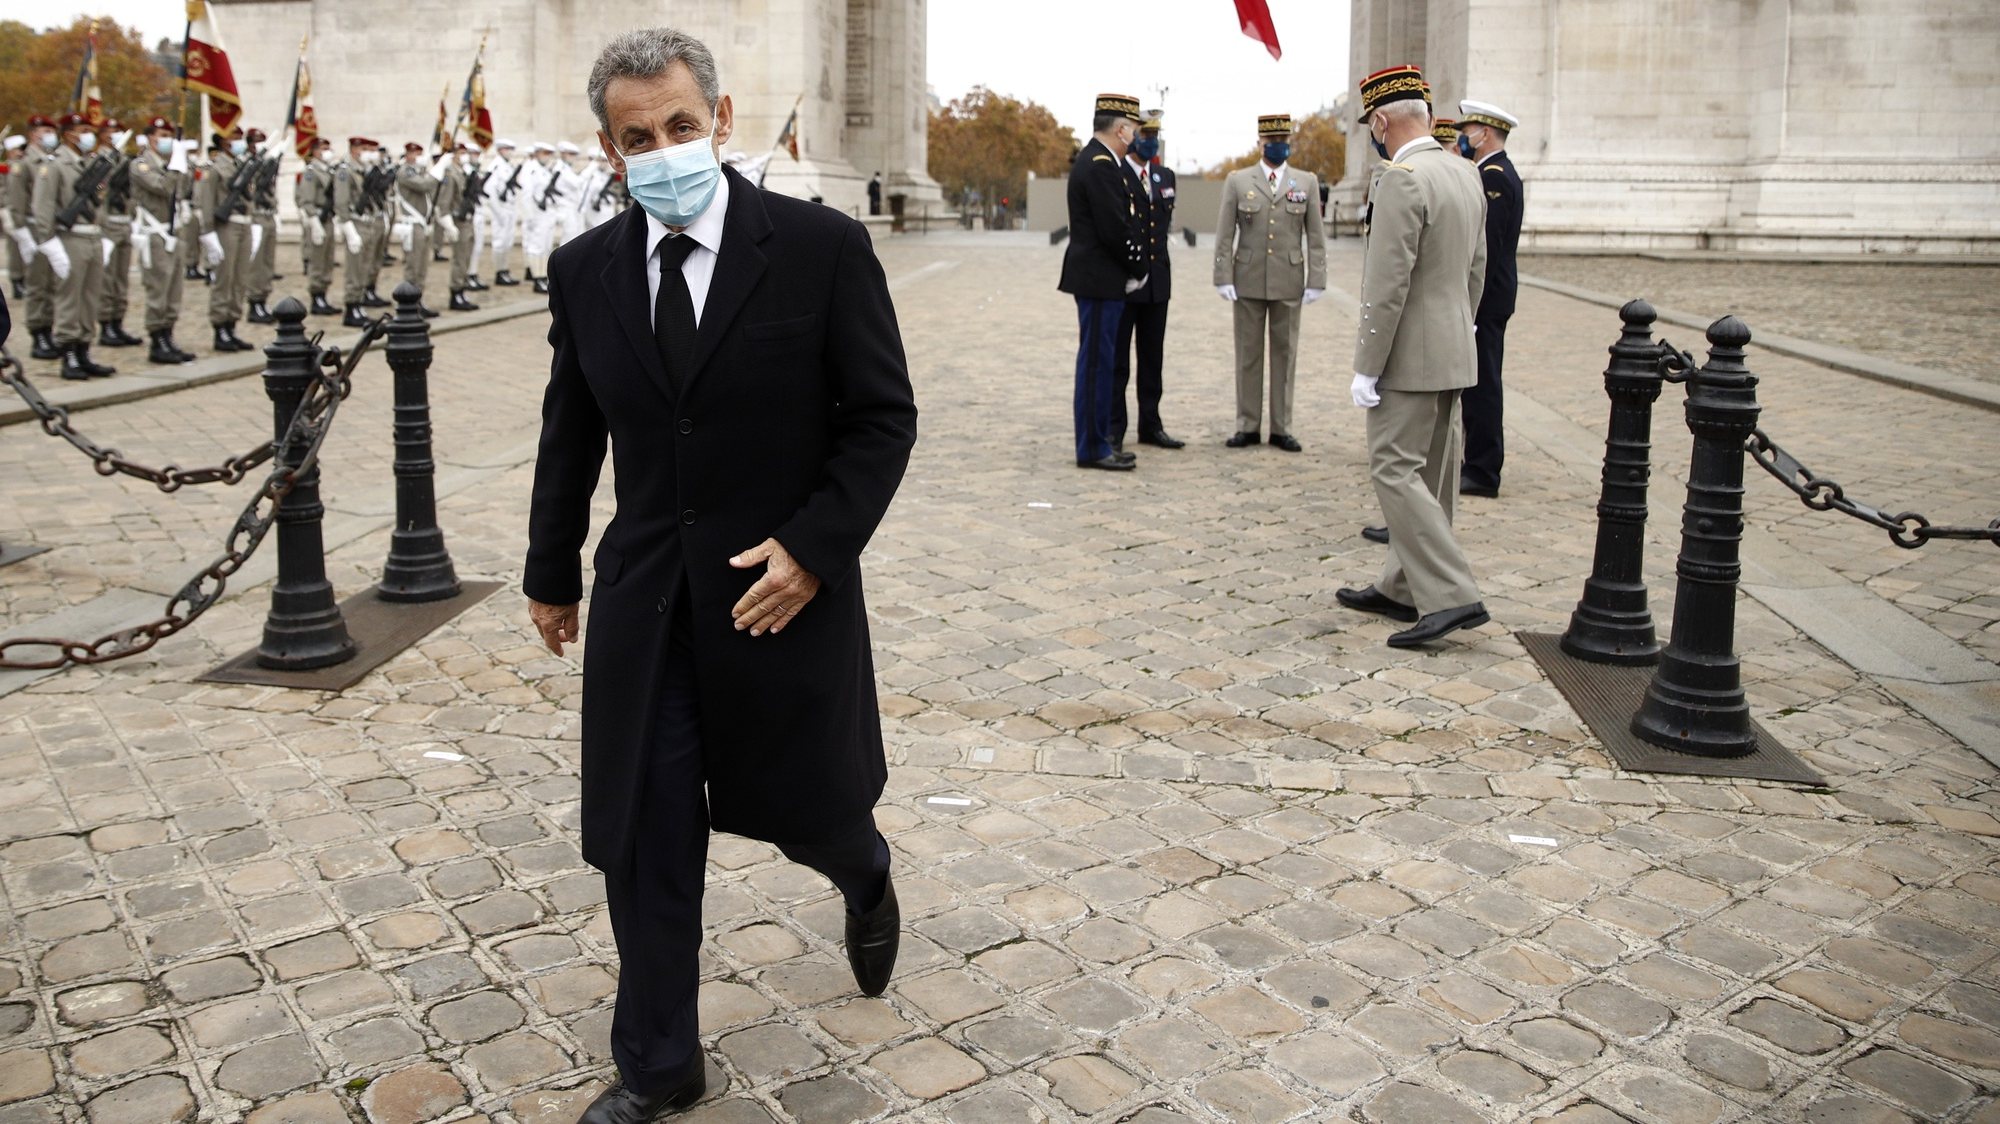 epa08812986 French former President Nicolas Sarkozy leaves after attending a ceremony at the Arc de Triomphe in Paris, France, 11 November 2020, as part of the commemorations marking the 102nd anniversary of the 11 November 1918 armistice, ending World War I (WWI).  EPA/YOAN VALAT / POOL